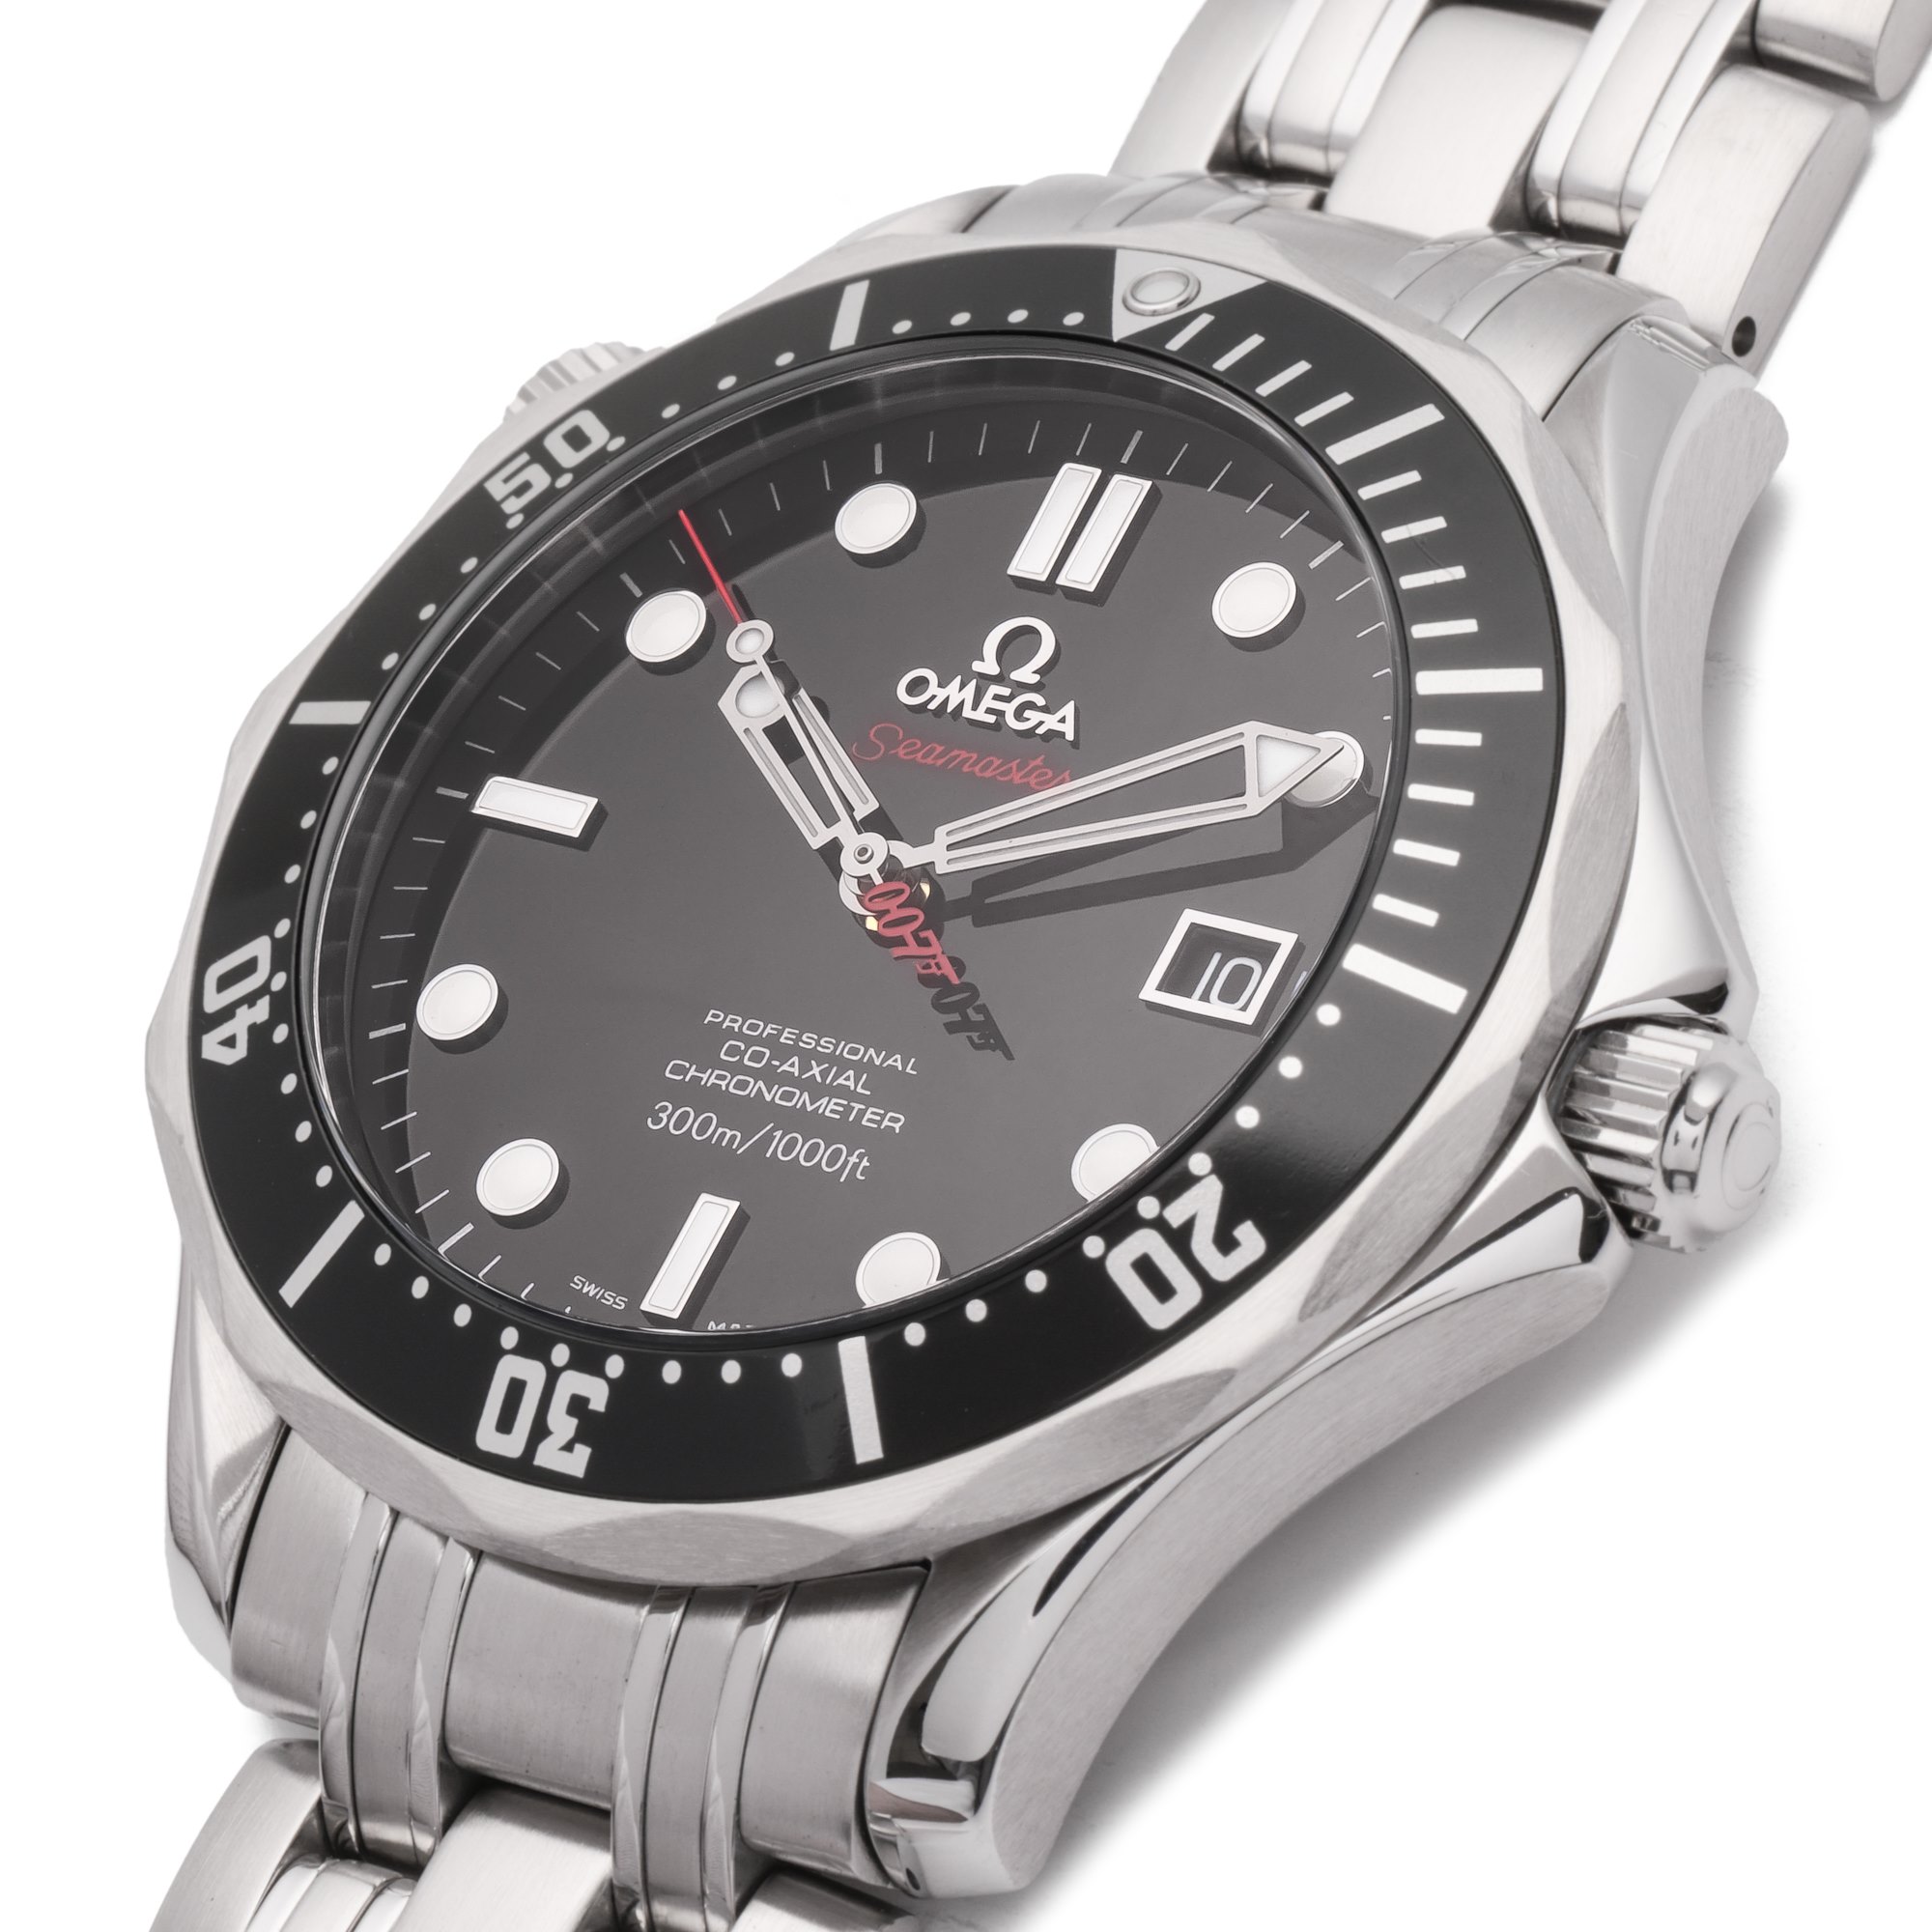 Omega Seamaster 300 007 Limited Series of 10007 Stainless Steel 212.30.41.20.01.001